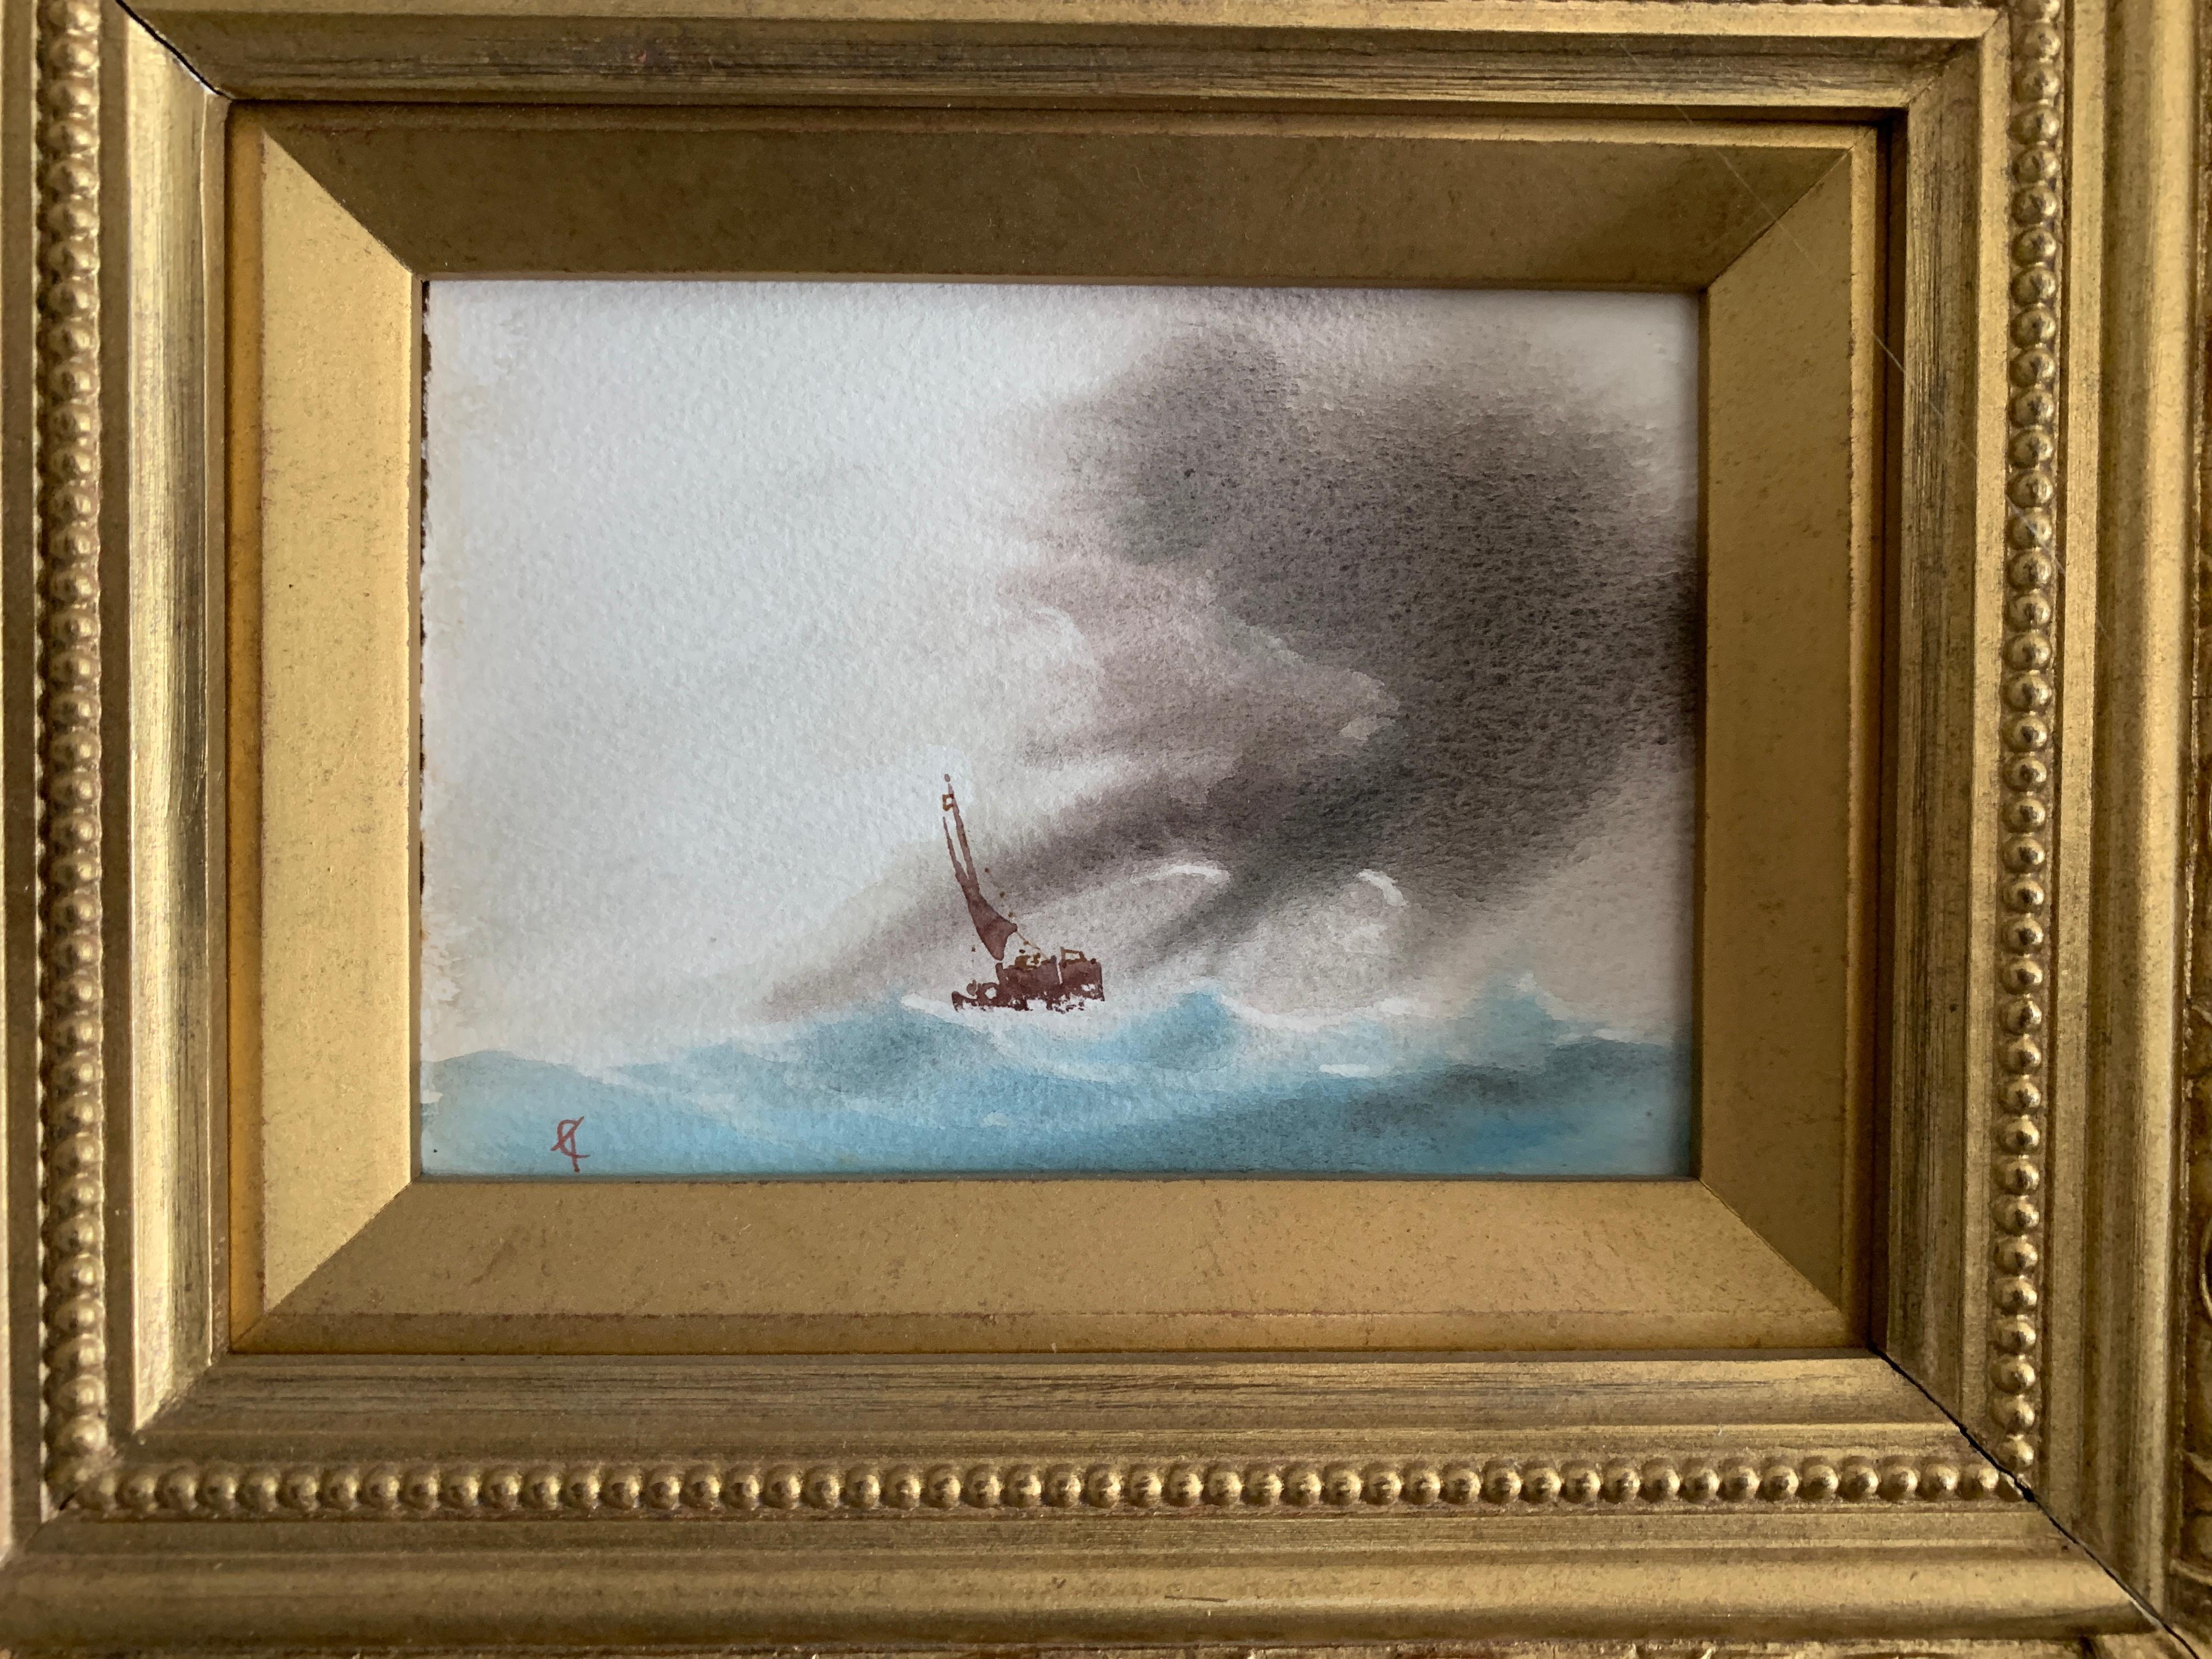 English 20th century, fishing boats at sea with storm clouds approaching. - Art by Thomas Castle